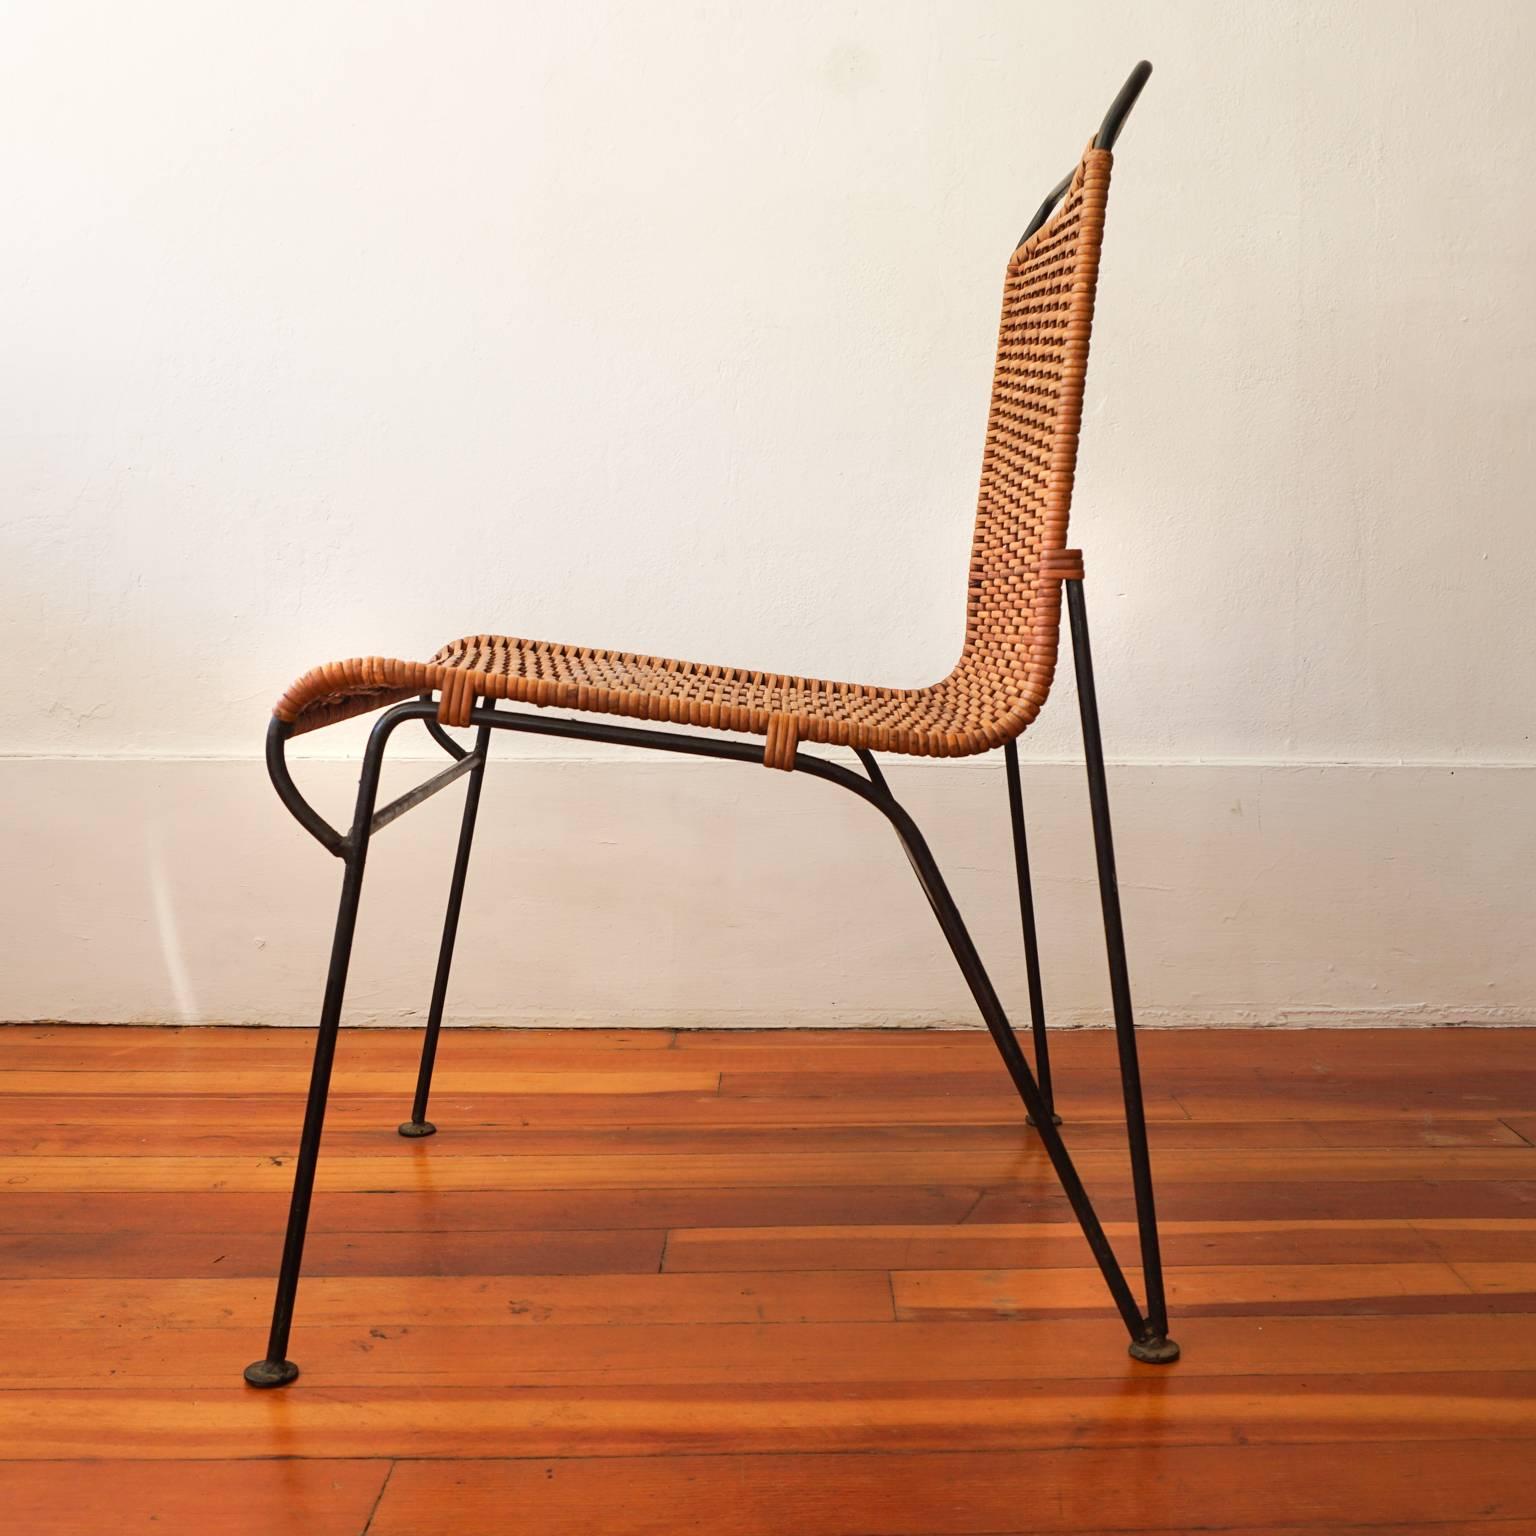 Pipsan Saarinen Swanson iron and cane chair. It was part of the Sol-Air Group, produced by Ficks Reed Company in the 1950s.

Pipsan was born in Finland in 1905 and she moved to the United Stated in 1923. Her father was architect Eliel Saarinen,